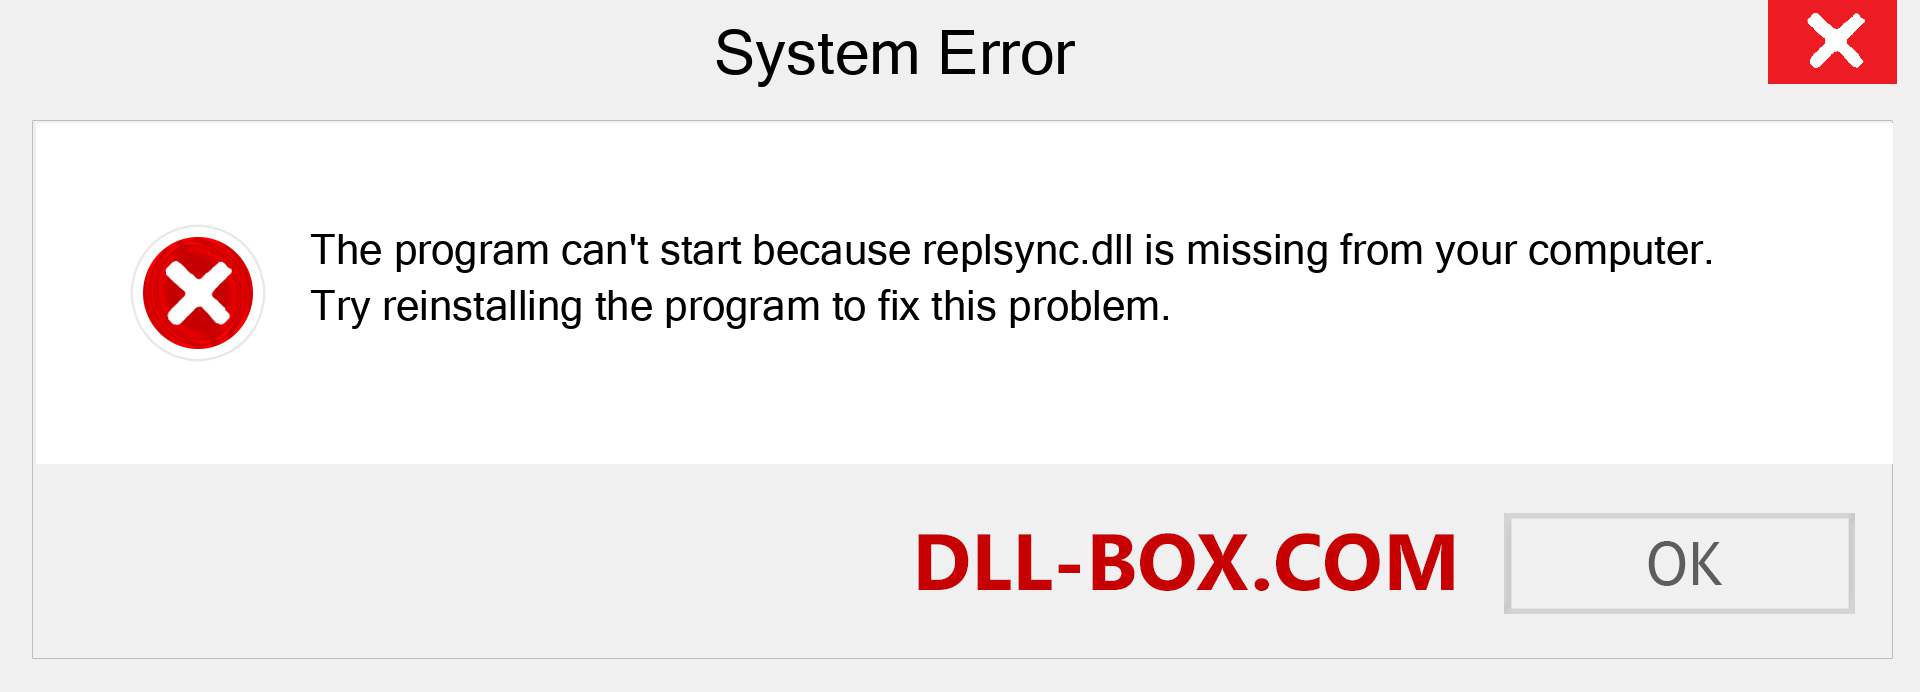  replsync.dll file is missing?. Download for Windows 7, 8, 10 - Fix  replsync dll Missing Error on Windows, photos, images